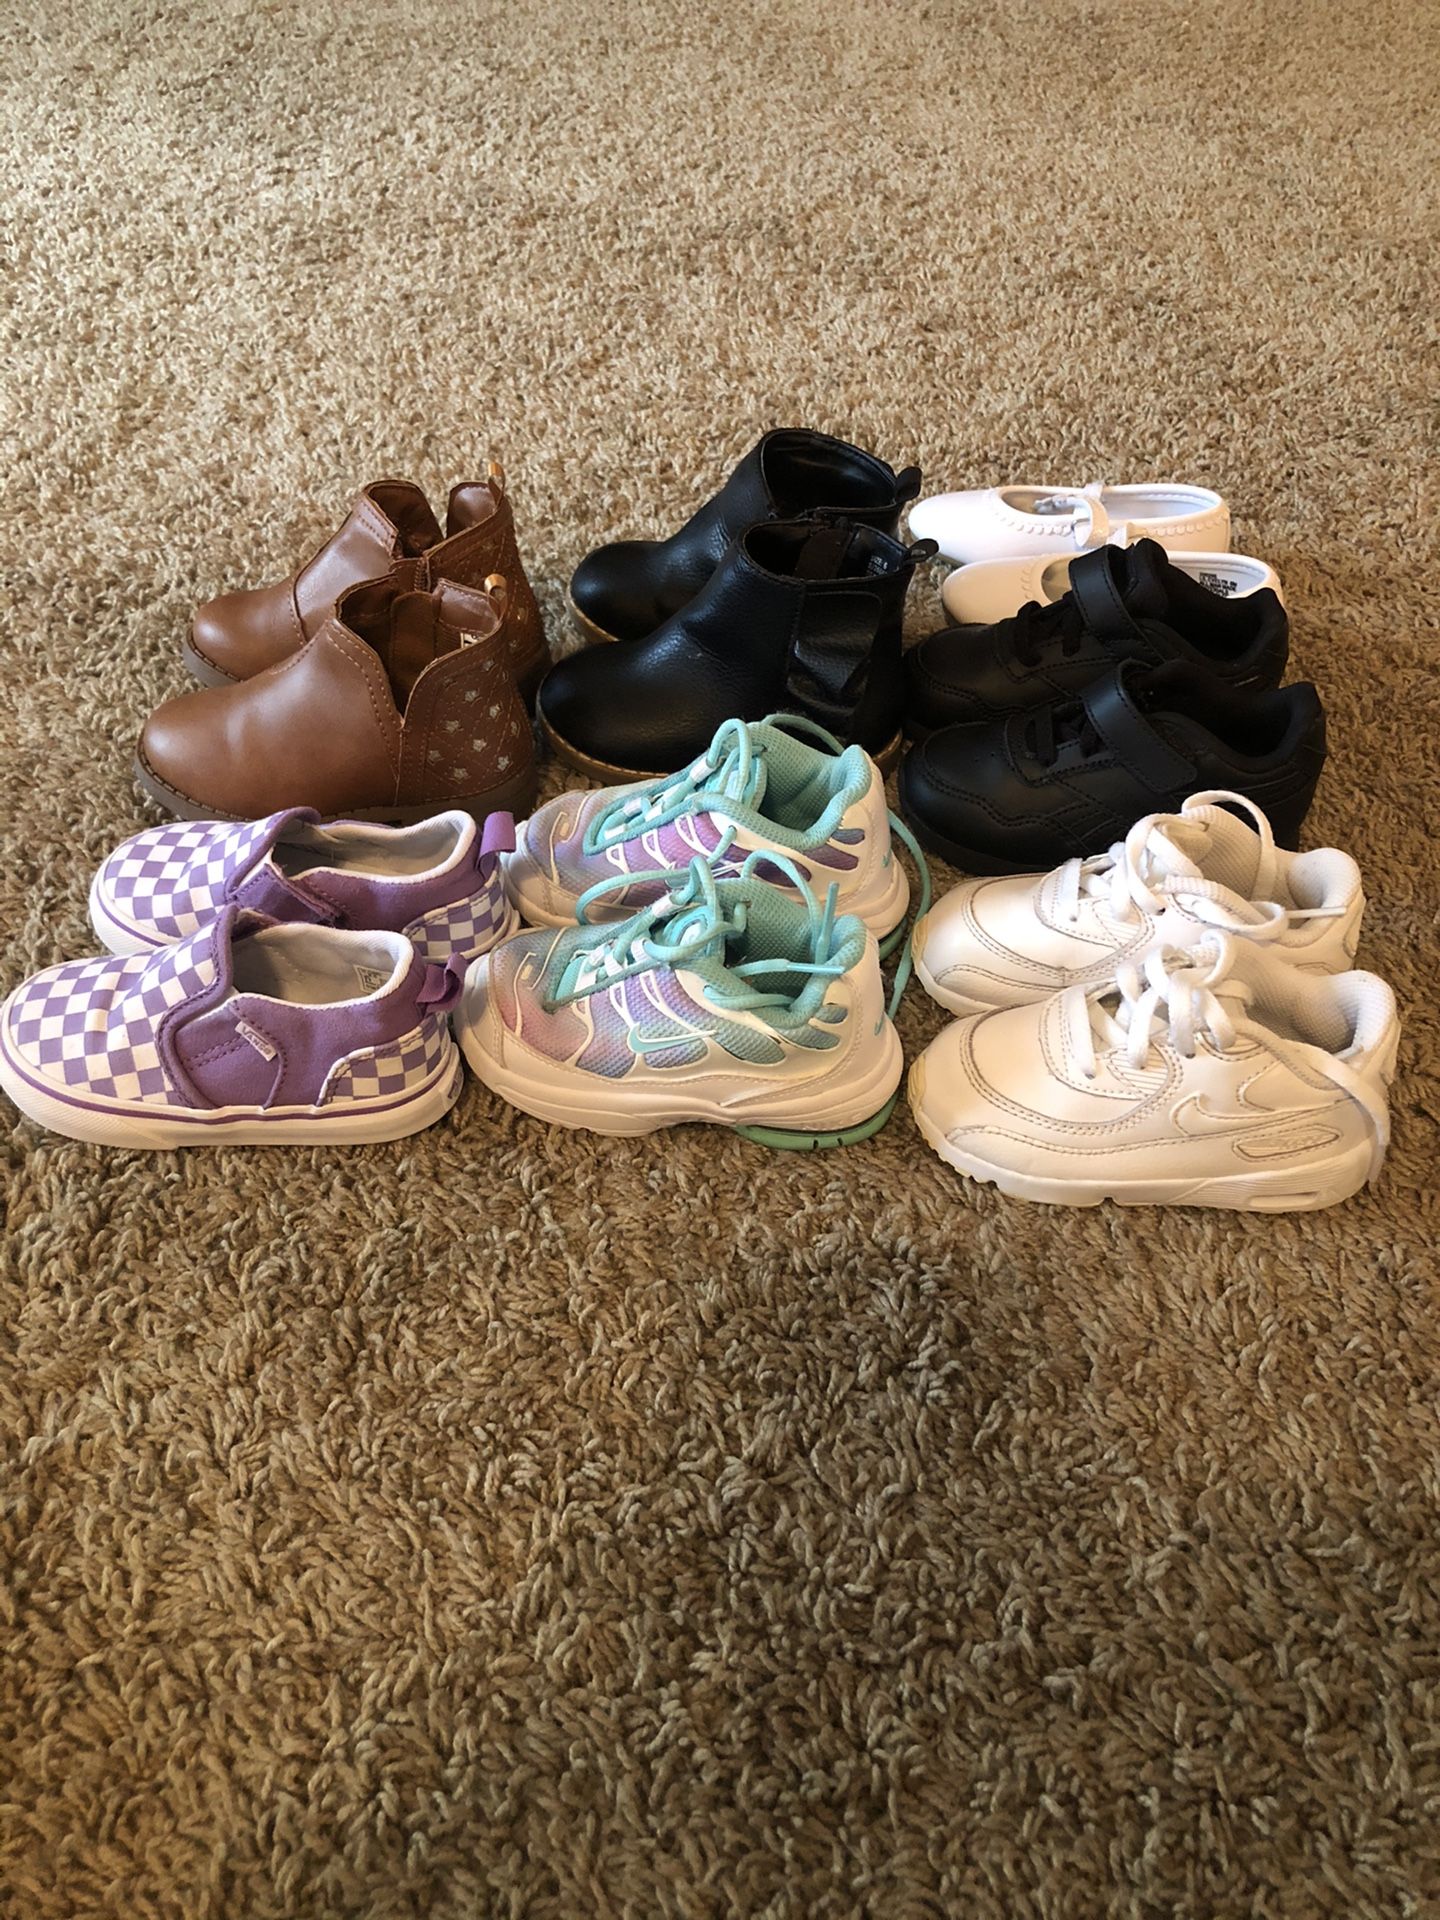 Gently worn toddler girl shoes